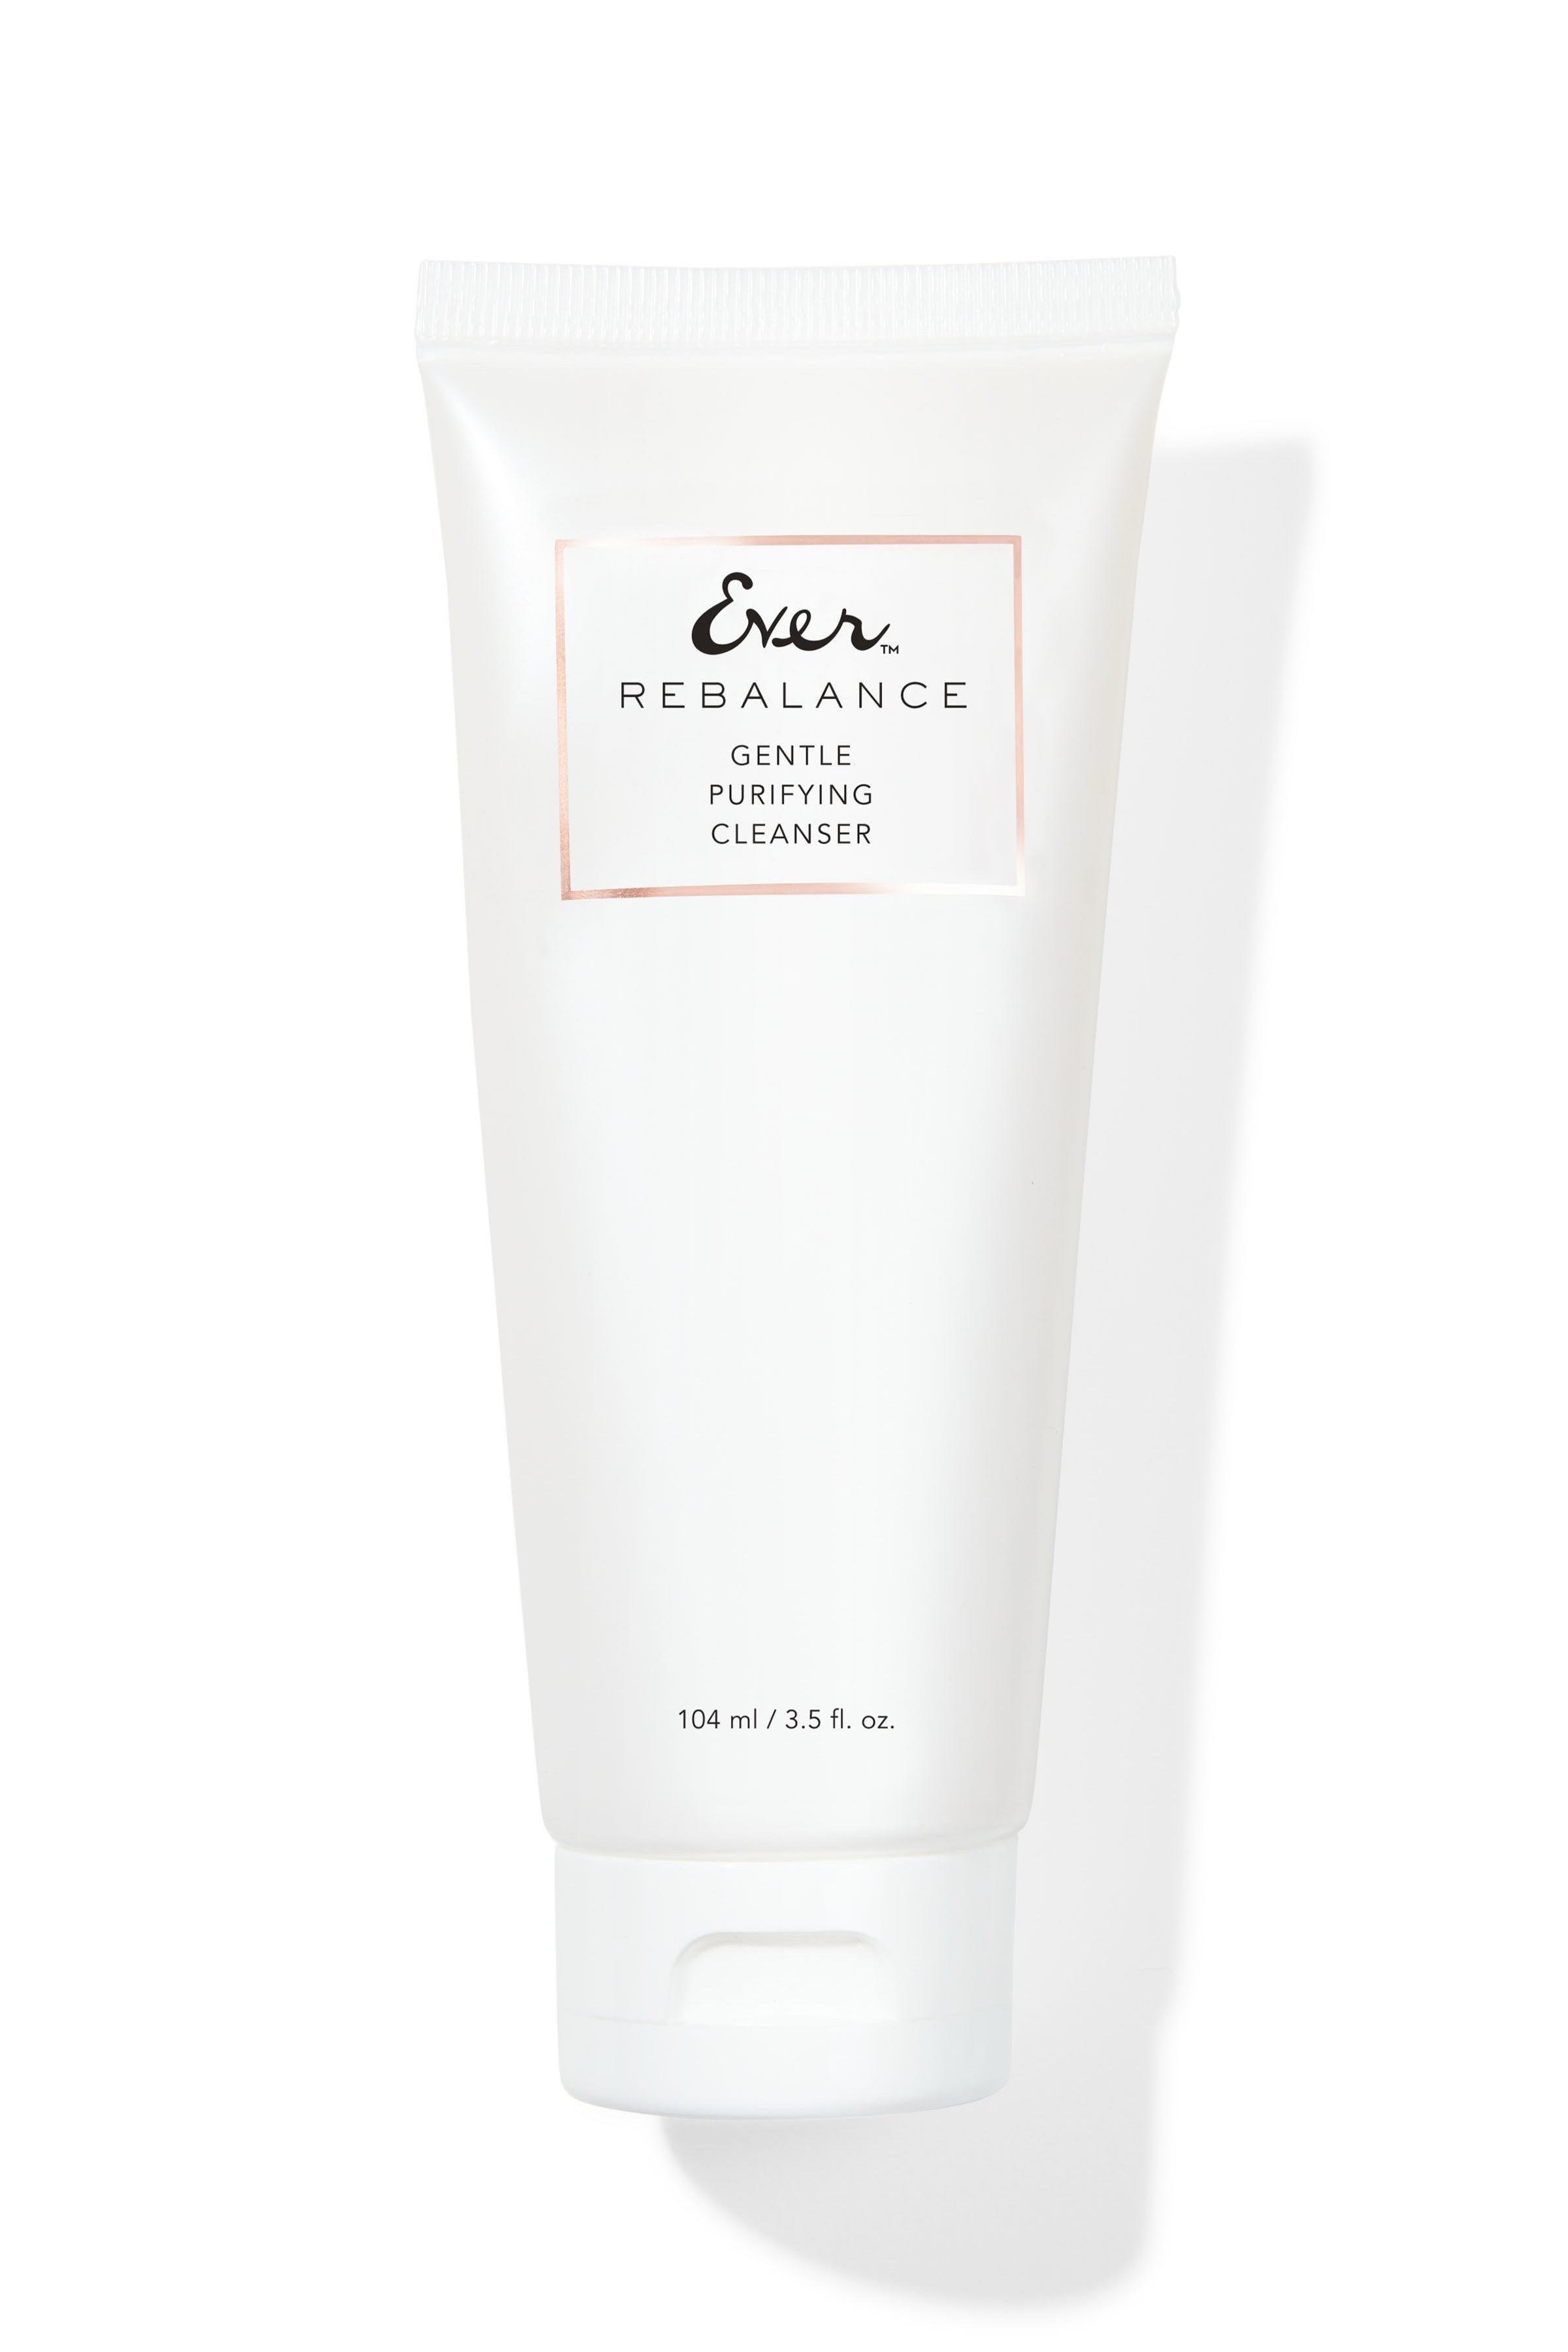 REBALANCE Gentle Purifying Cleanser (Oily Skin) - EVER